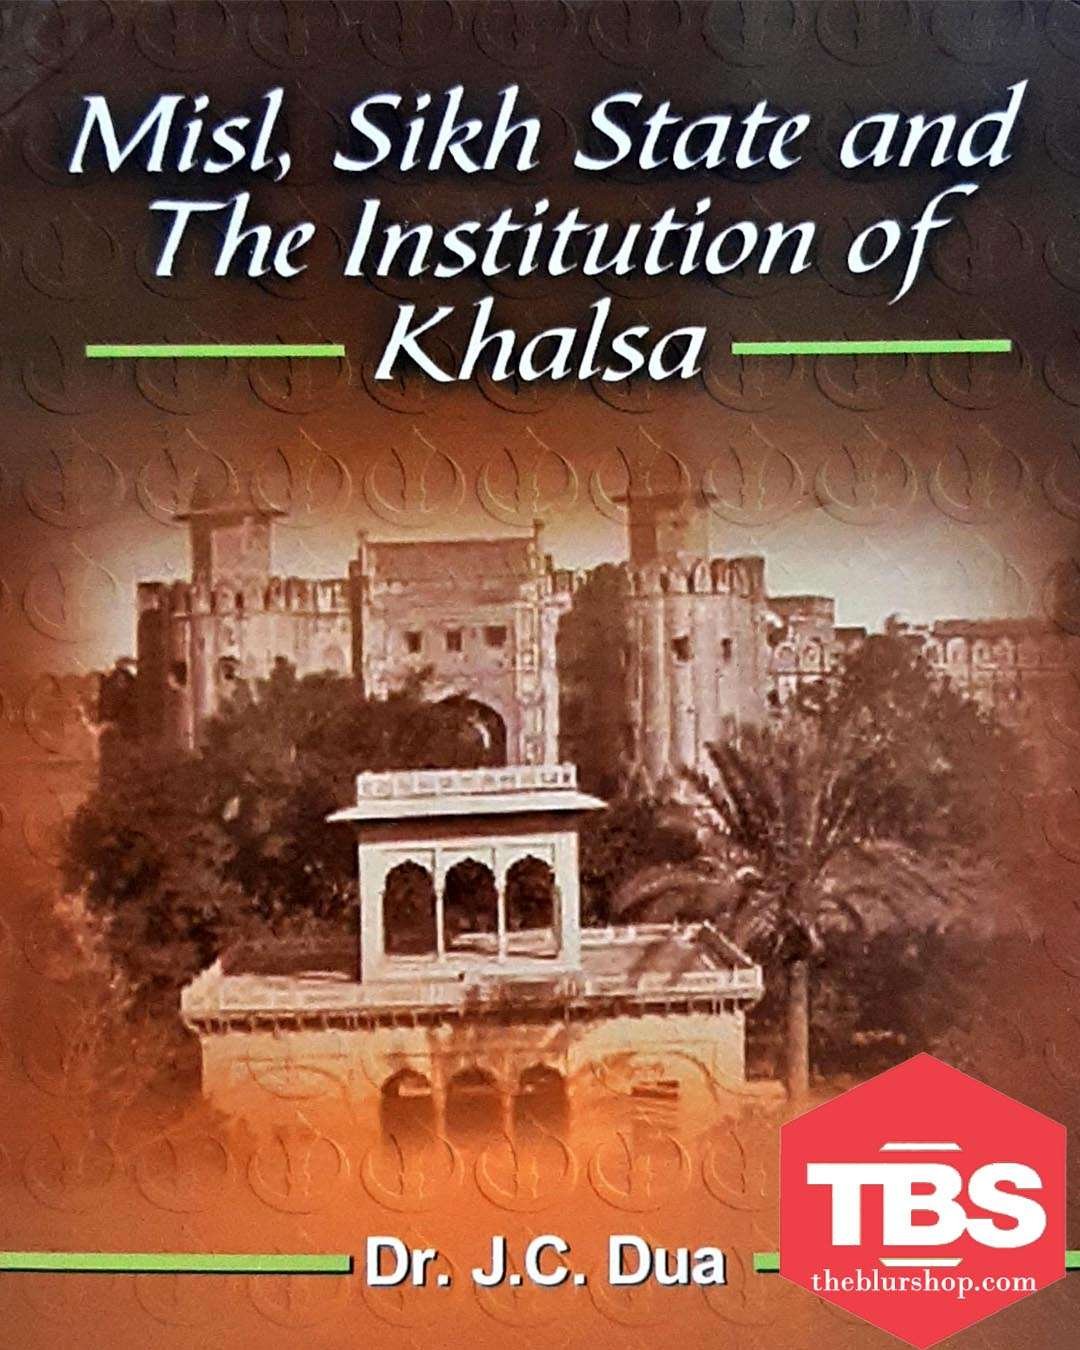 Misl,Sikh State and The Institution of Khalsa